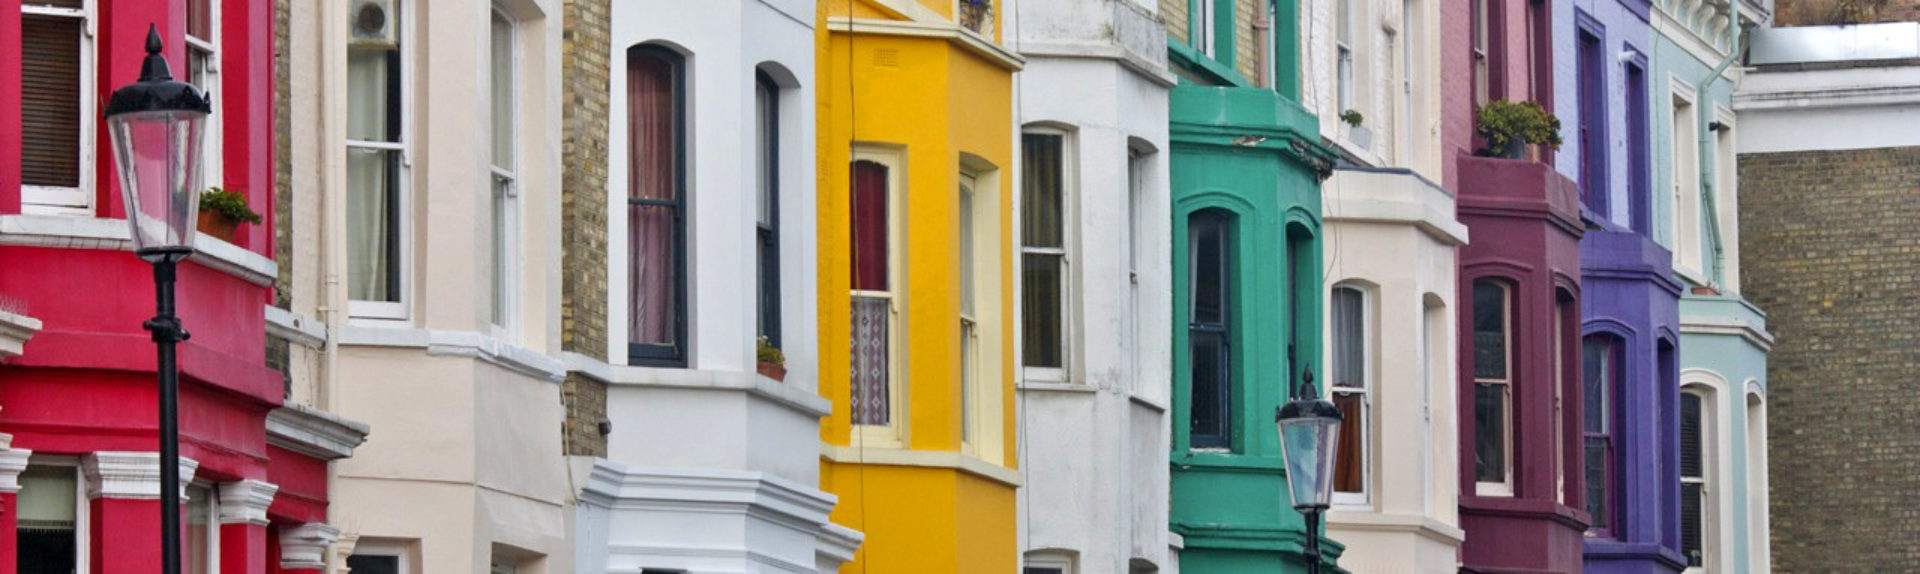 Brightly coloured terraced houses